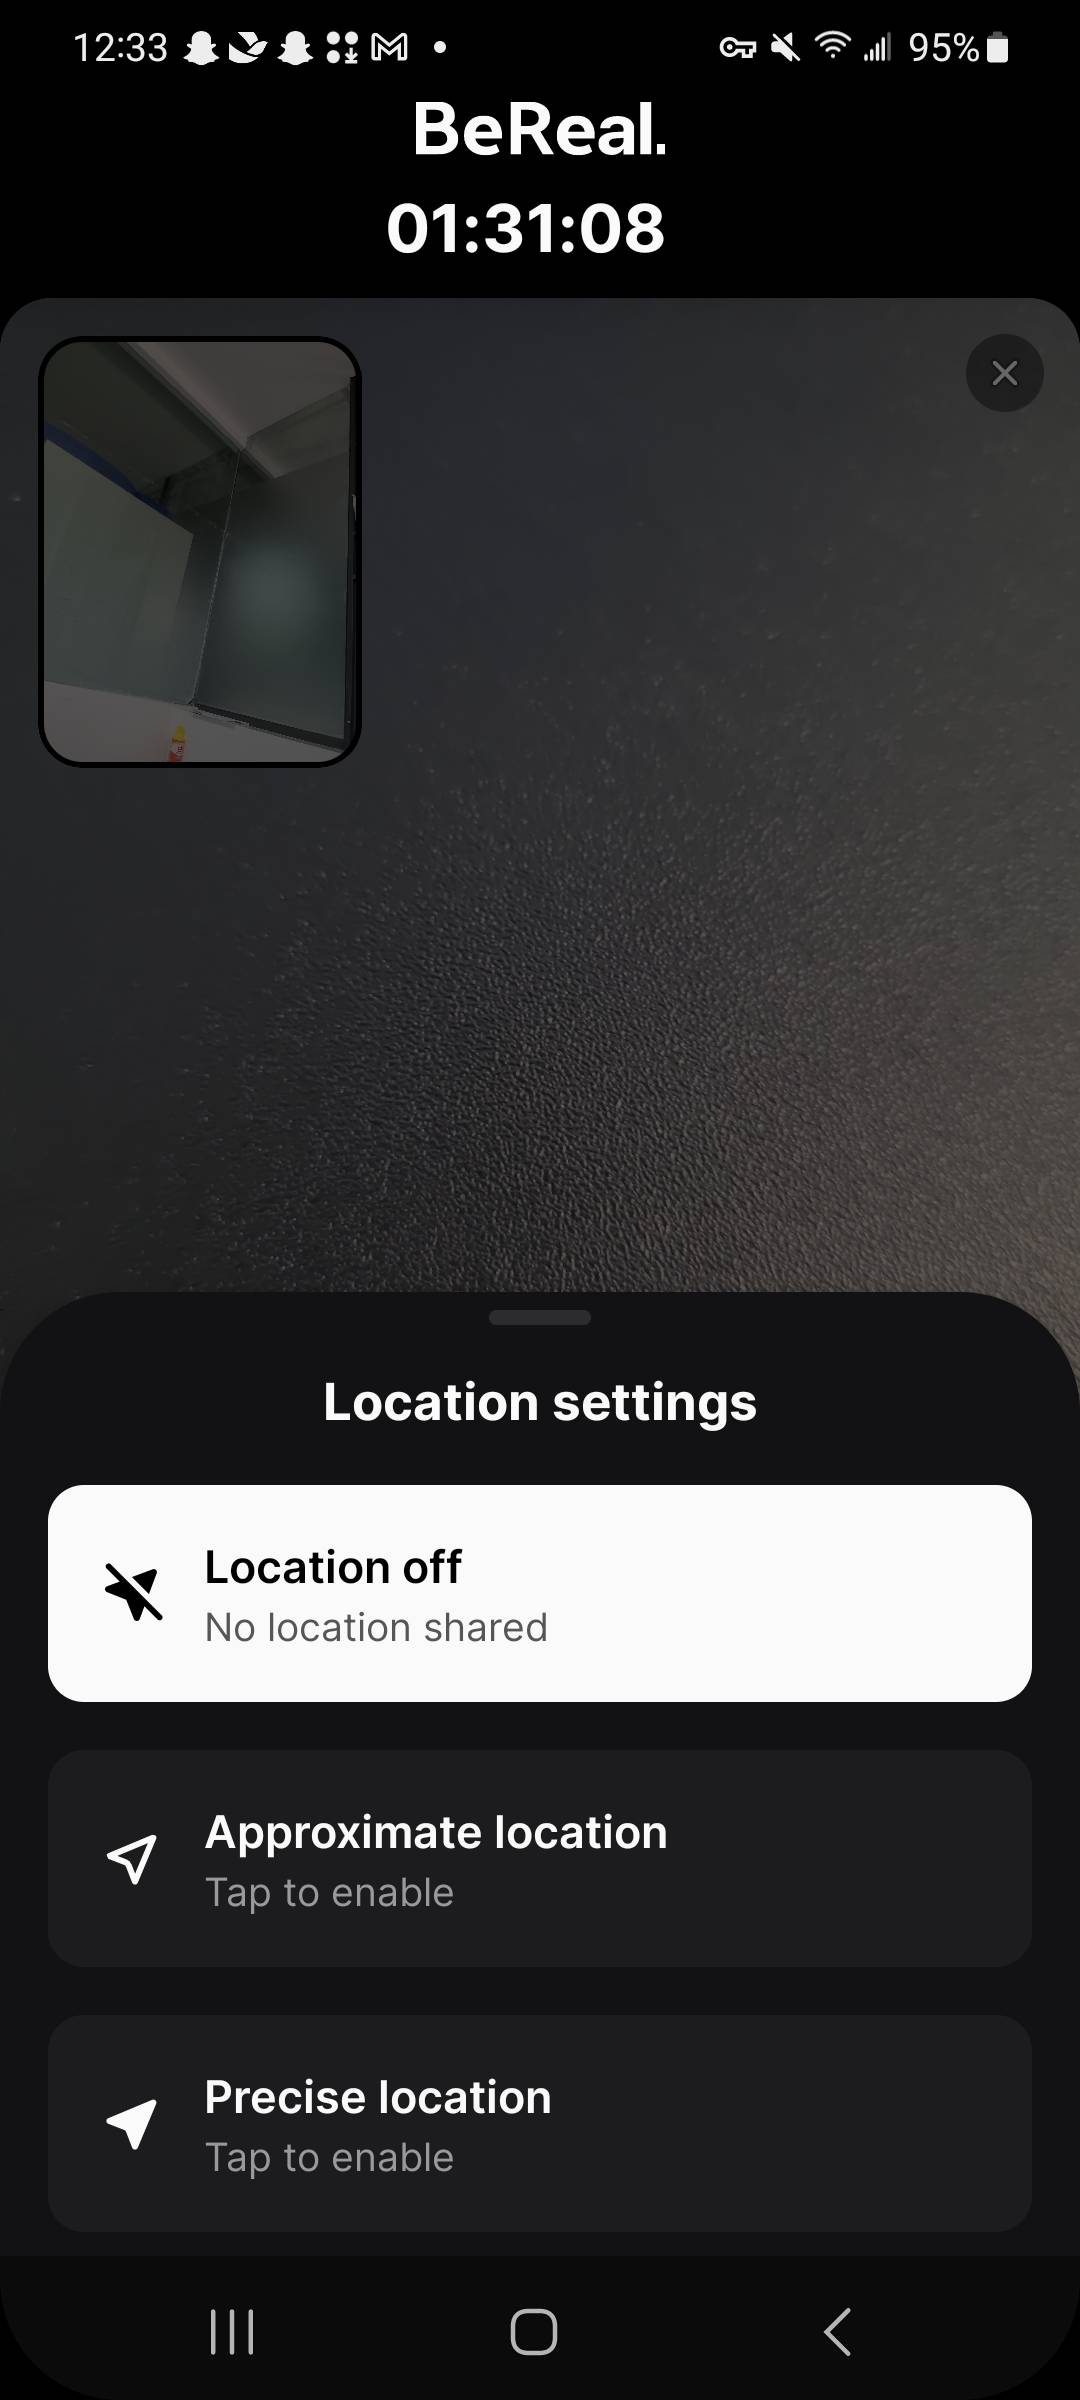 Tap to turn on location in BeReal